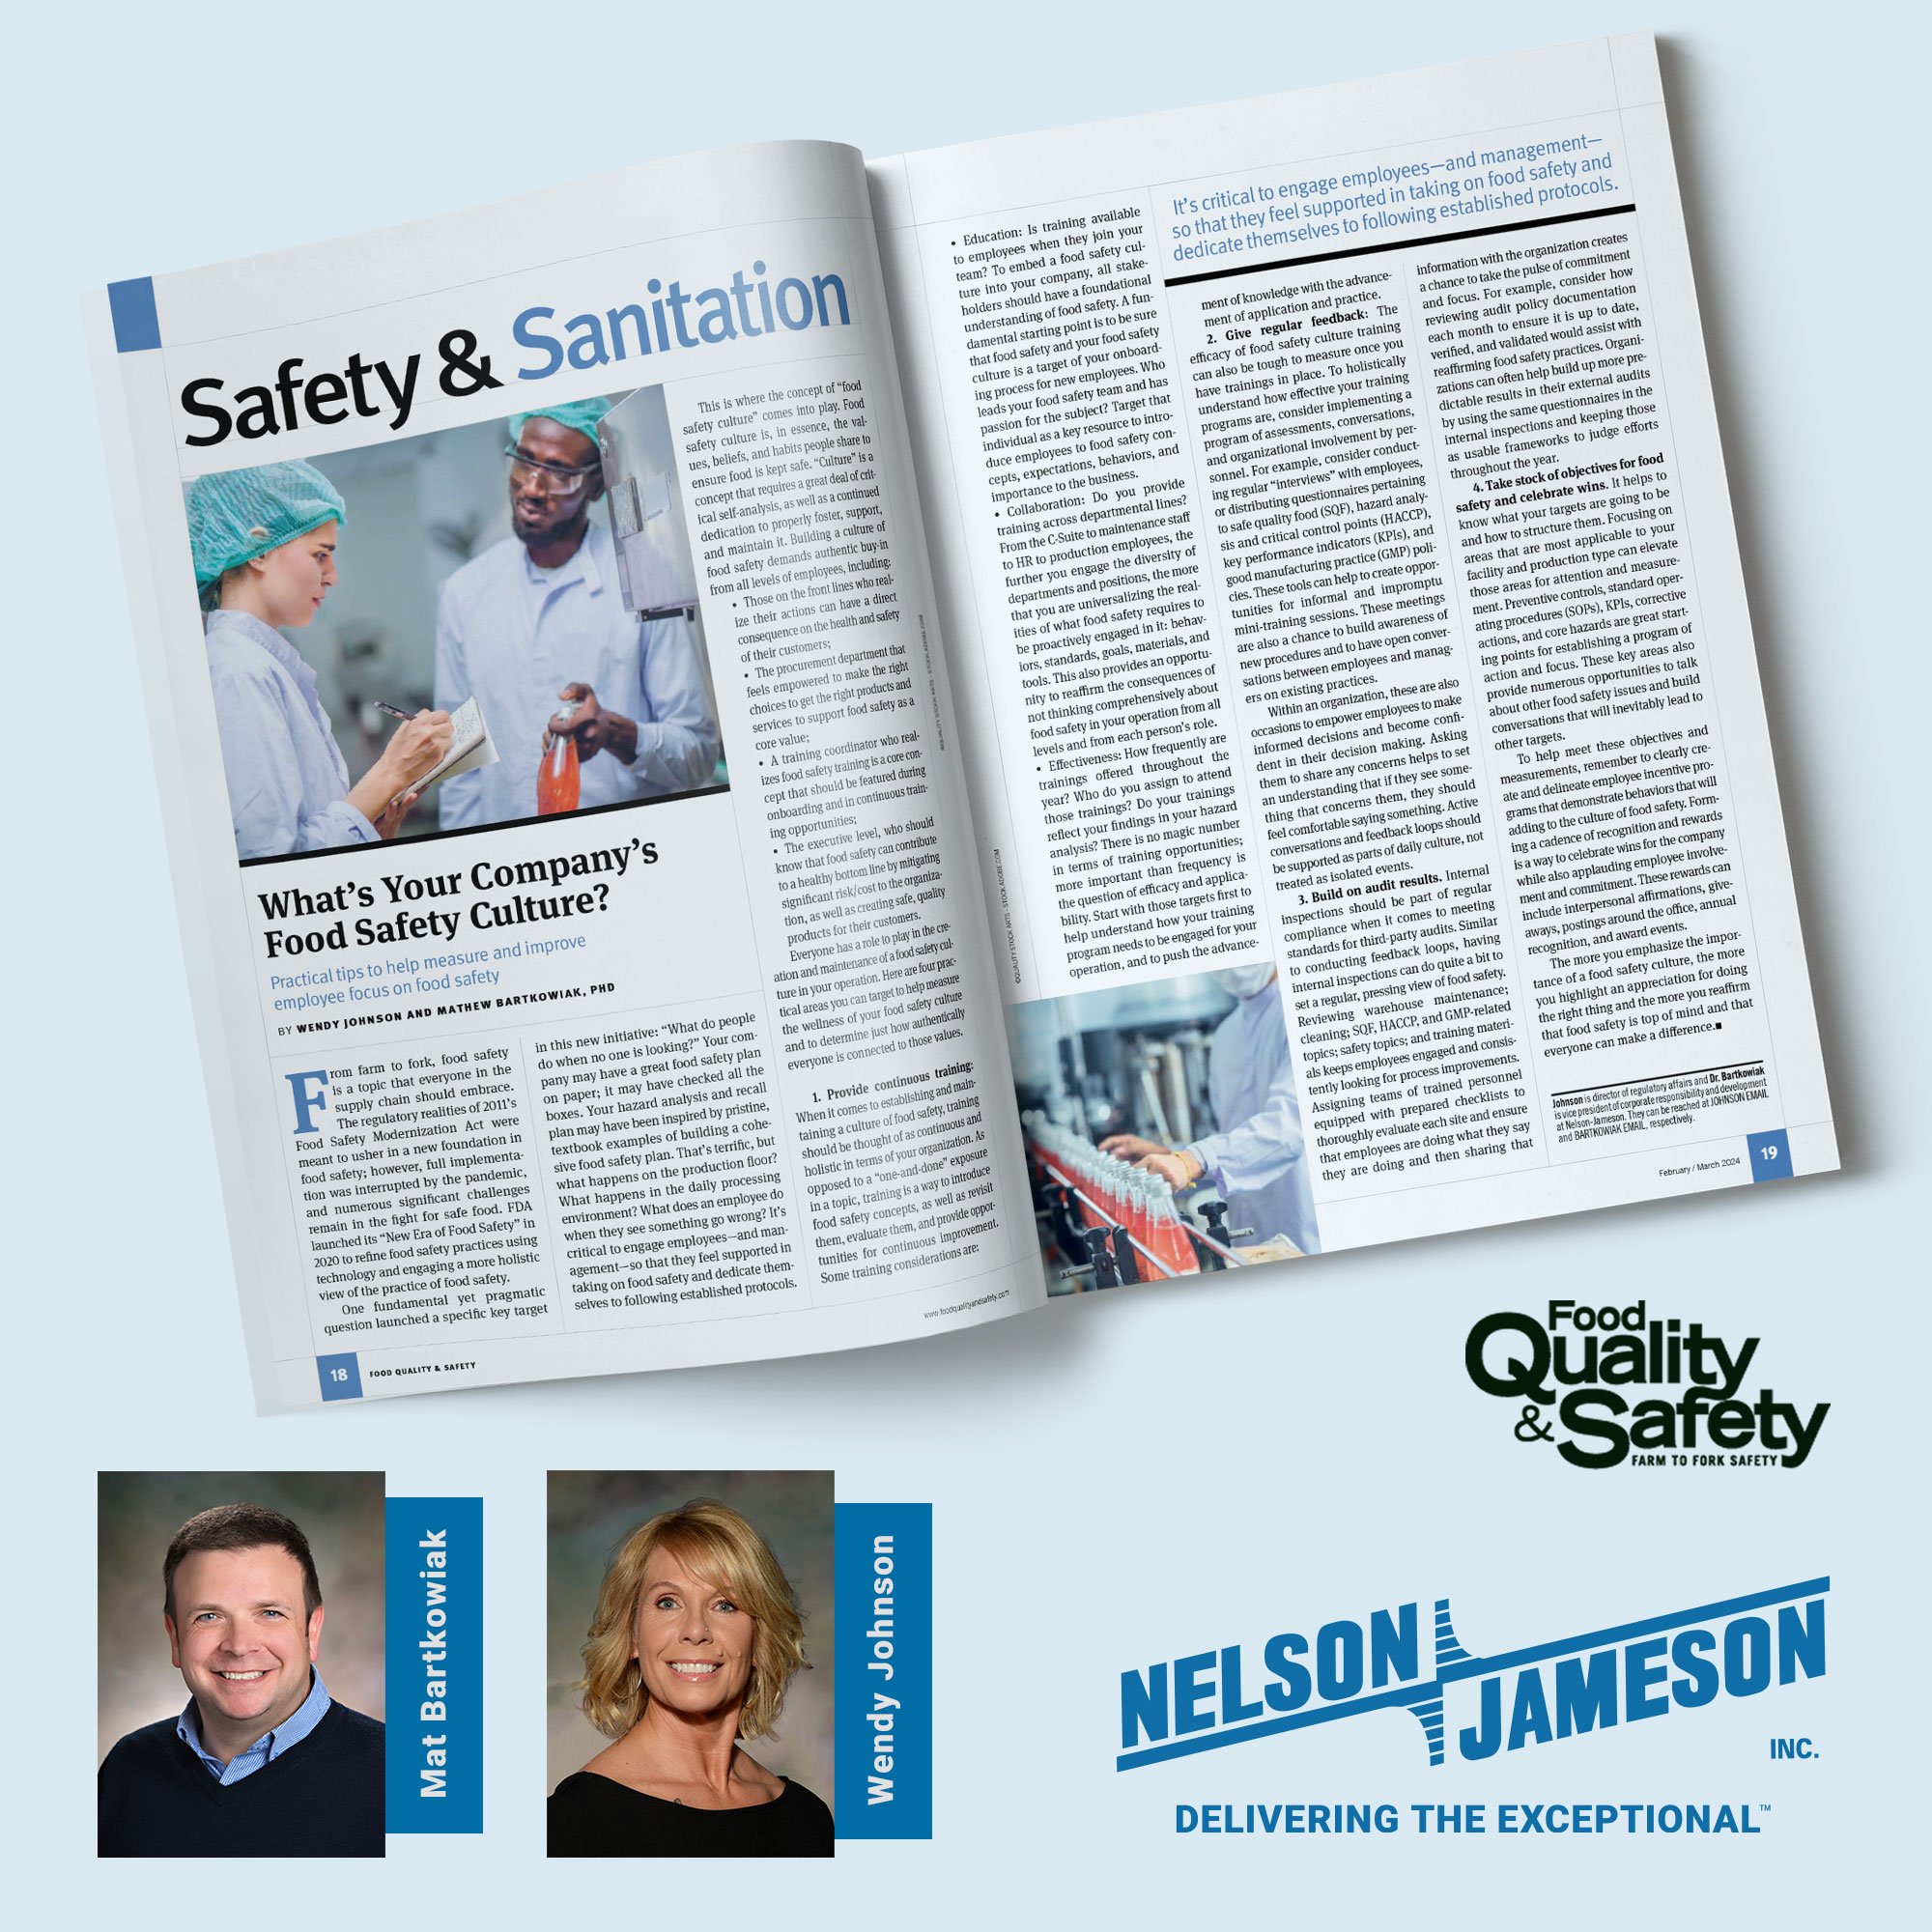 Safety & Sanitation: What's your company's food safety culture?